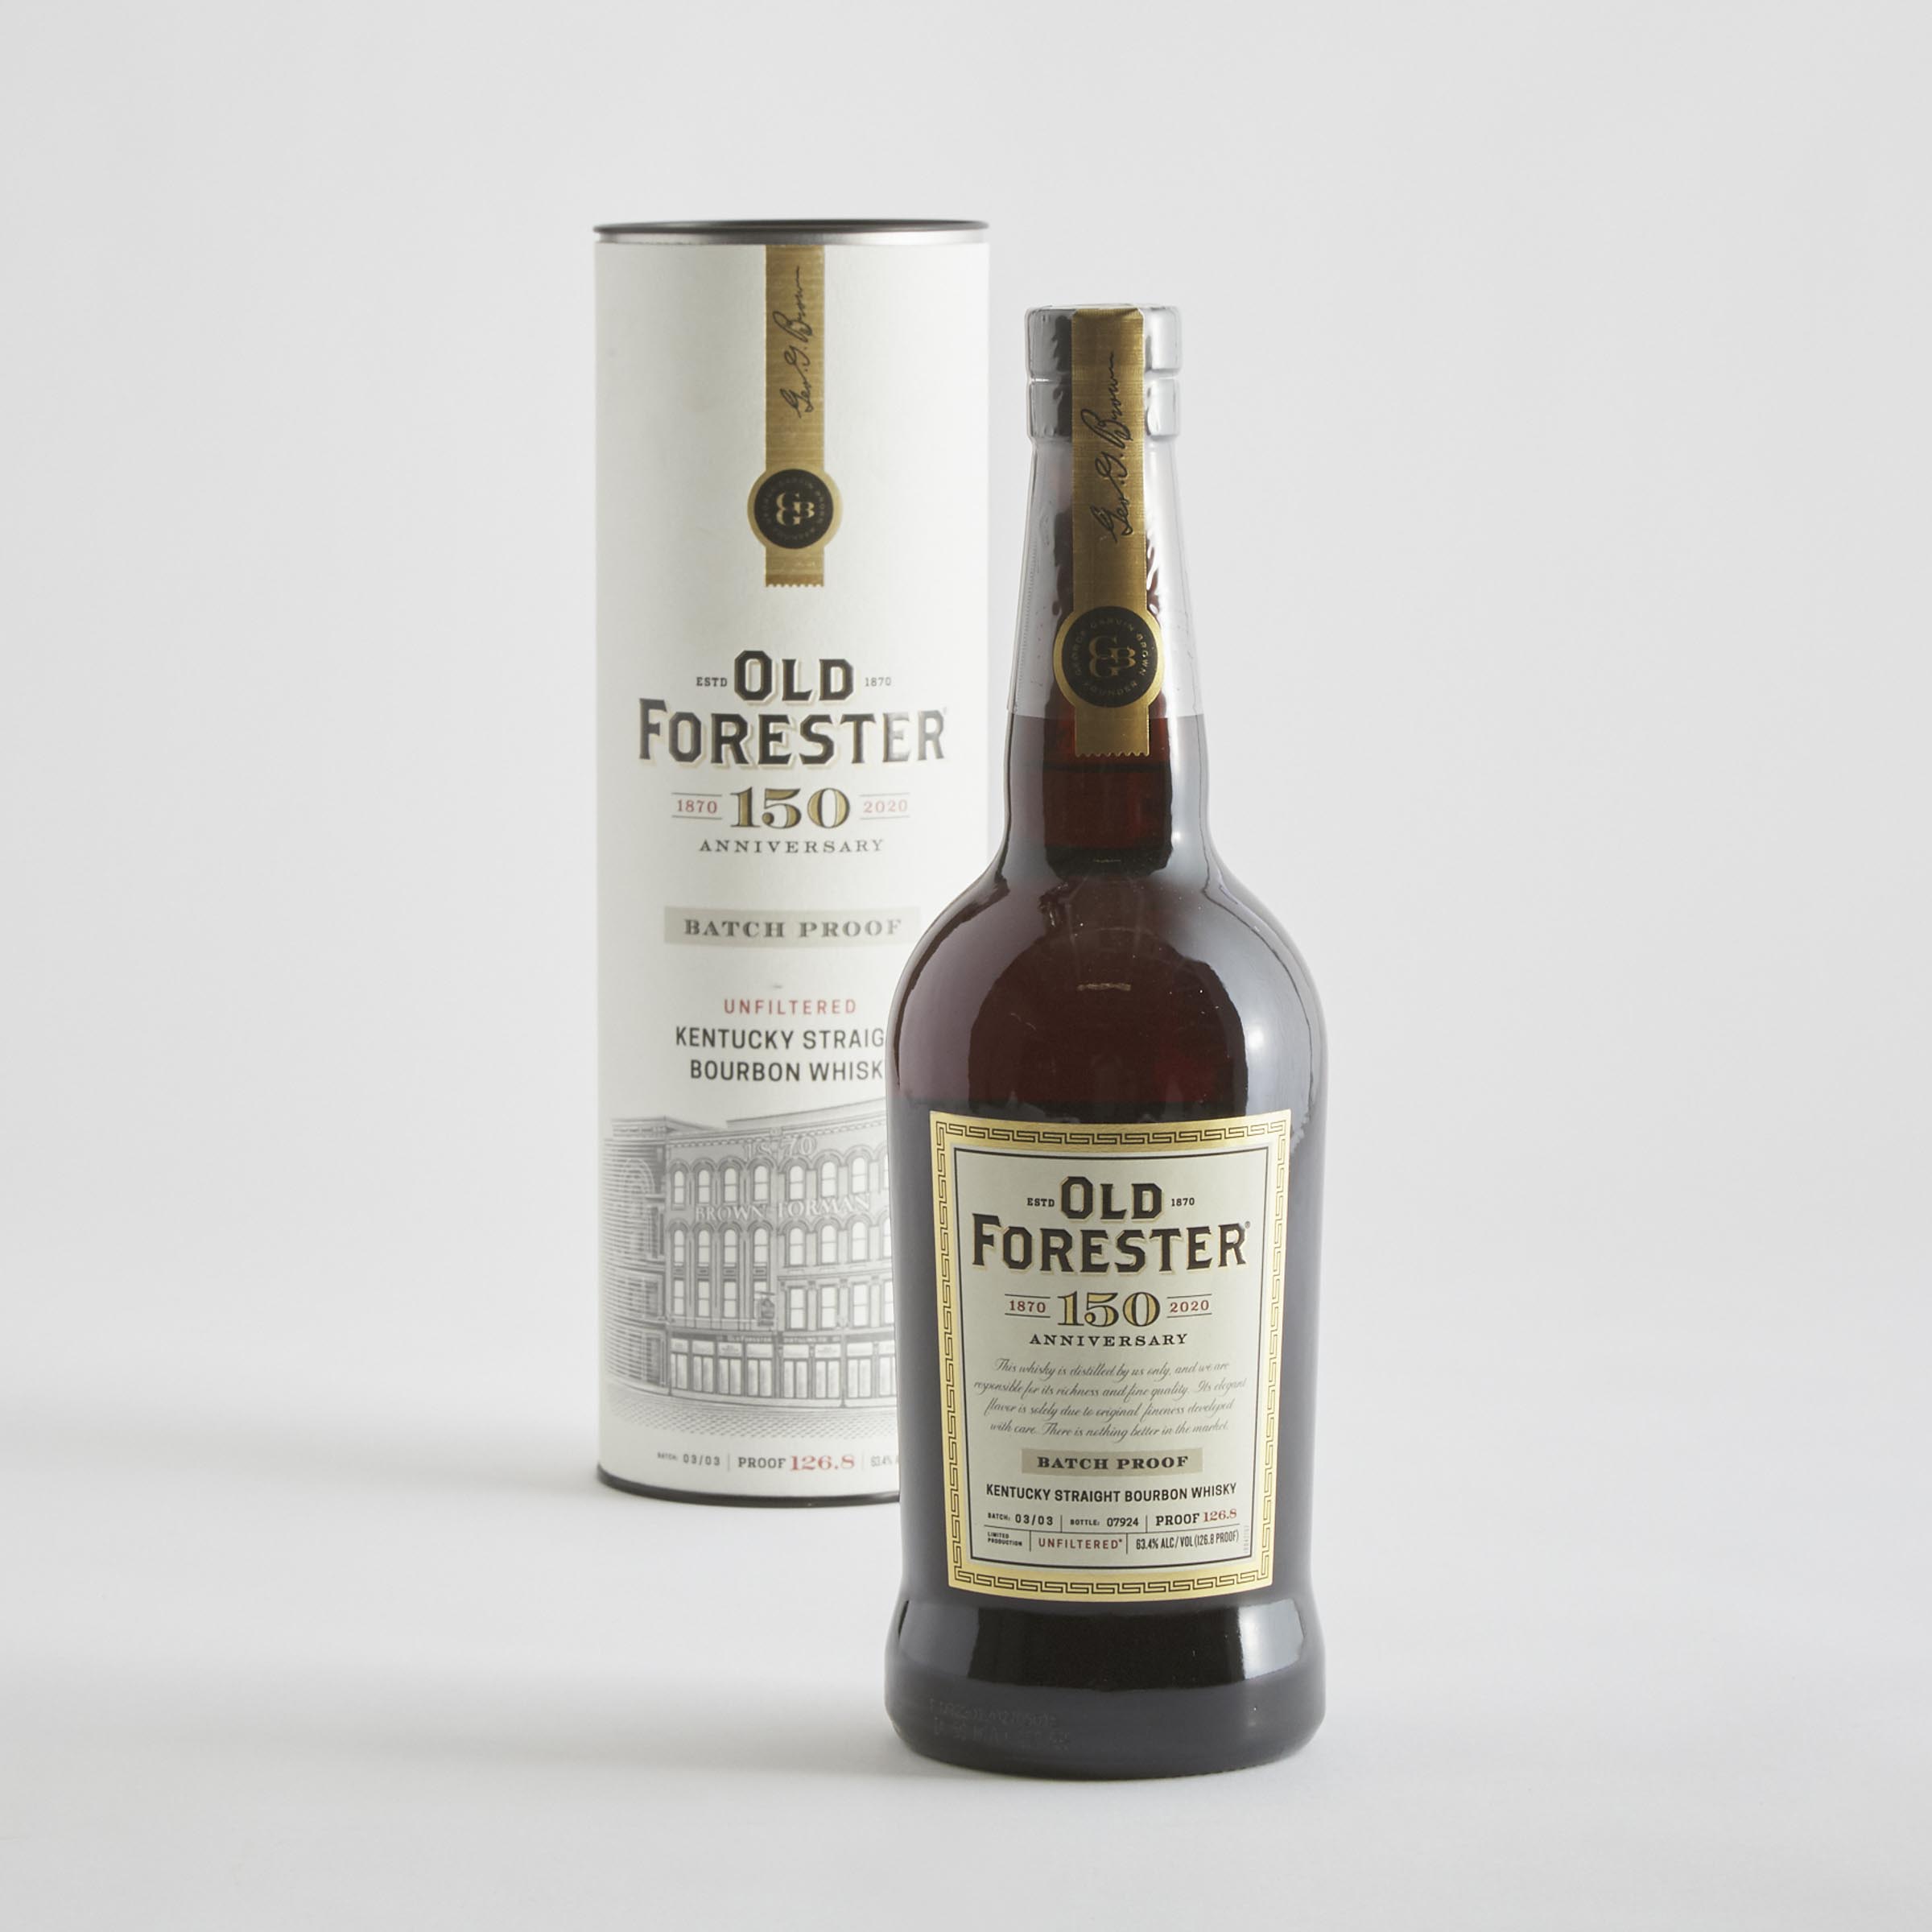 OLD FORESTER 150TH ANNIVERSARY BATCH PROOF STRAIGHT BOURBON WHISKY NAS (ONE 750 ML)